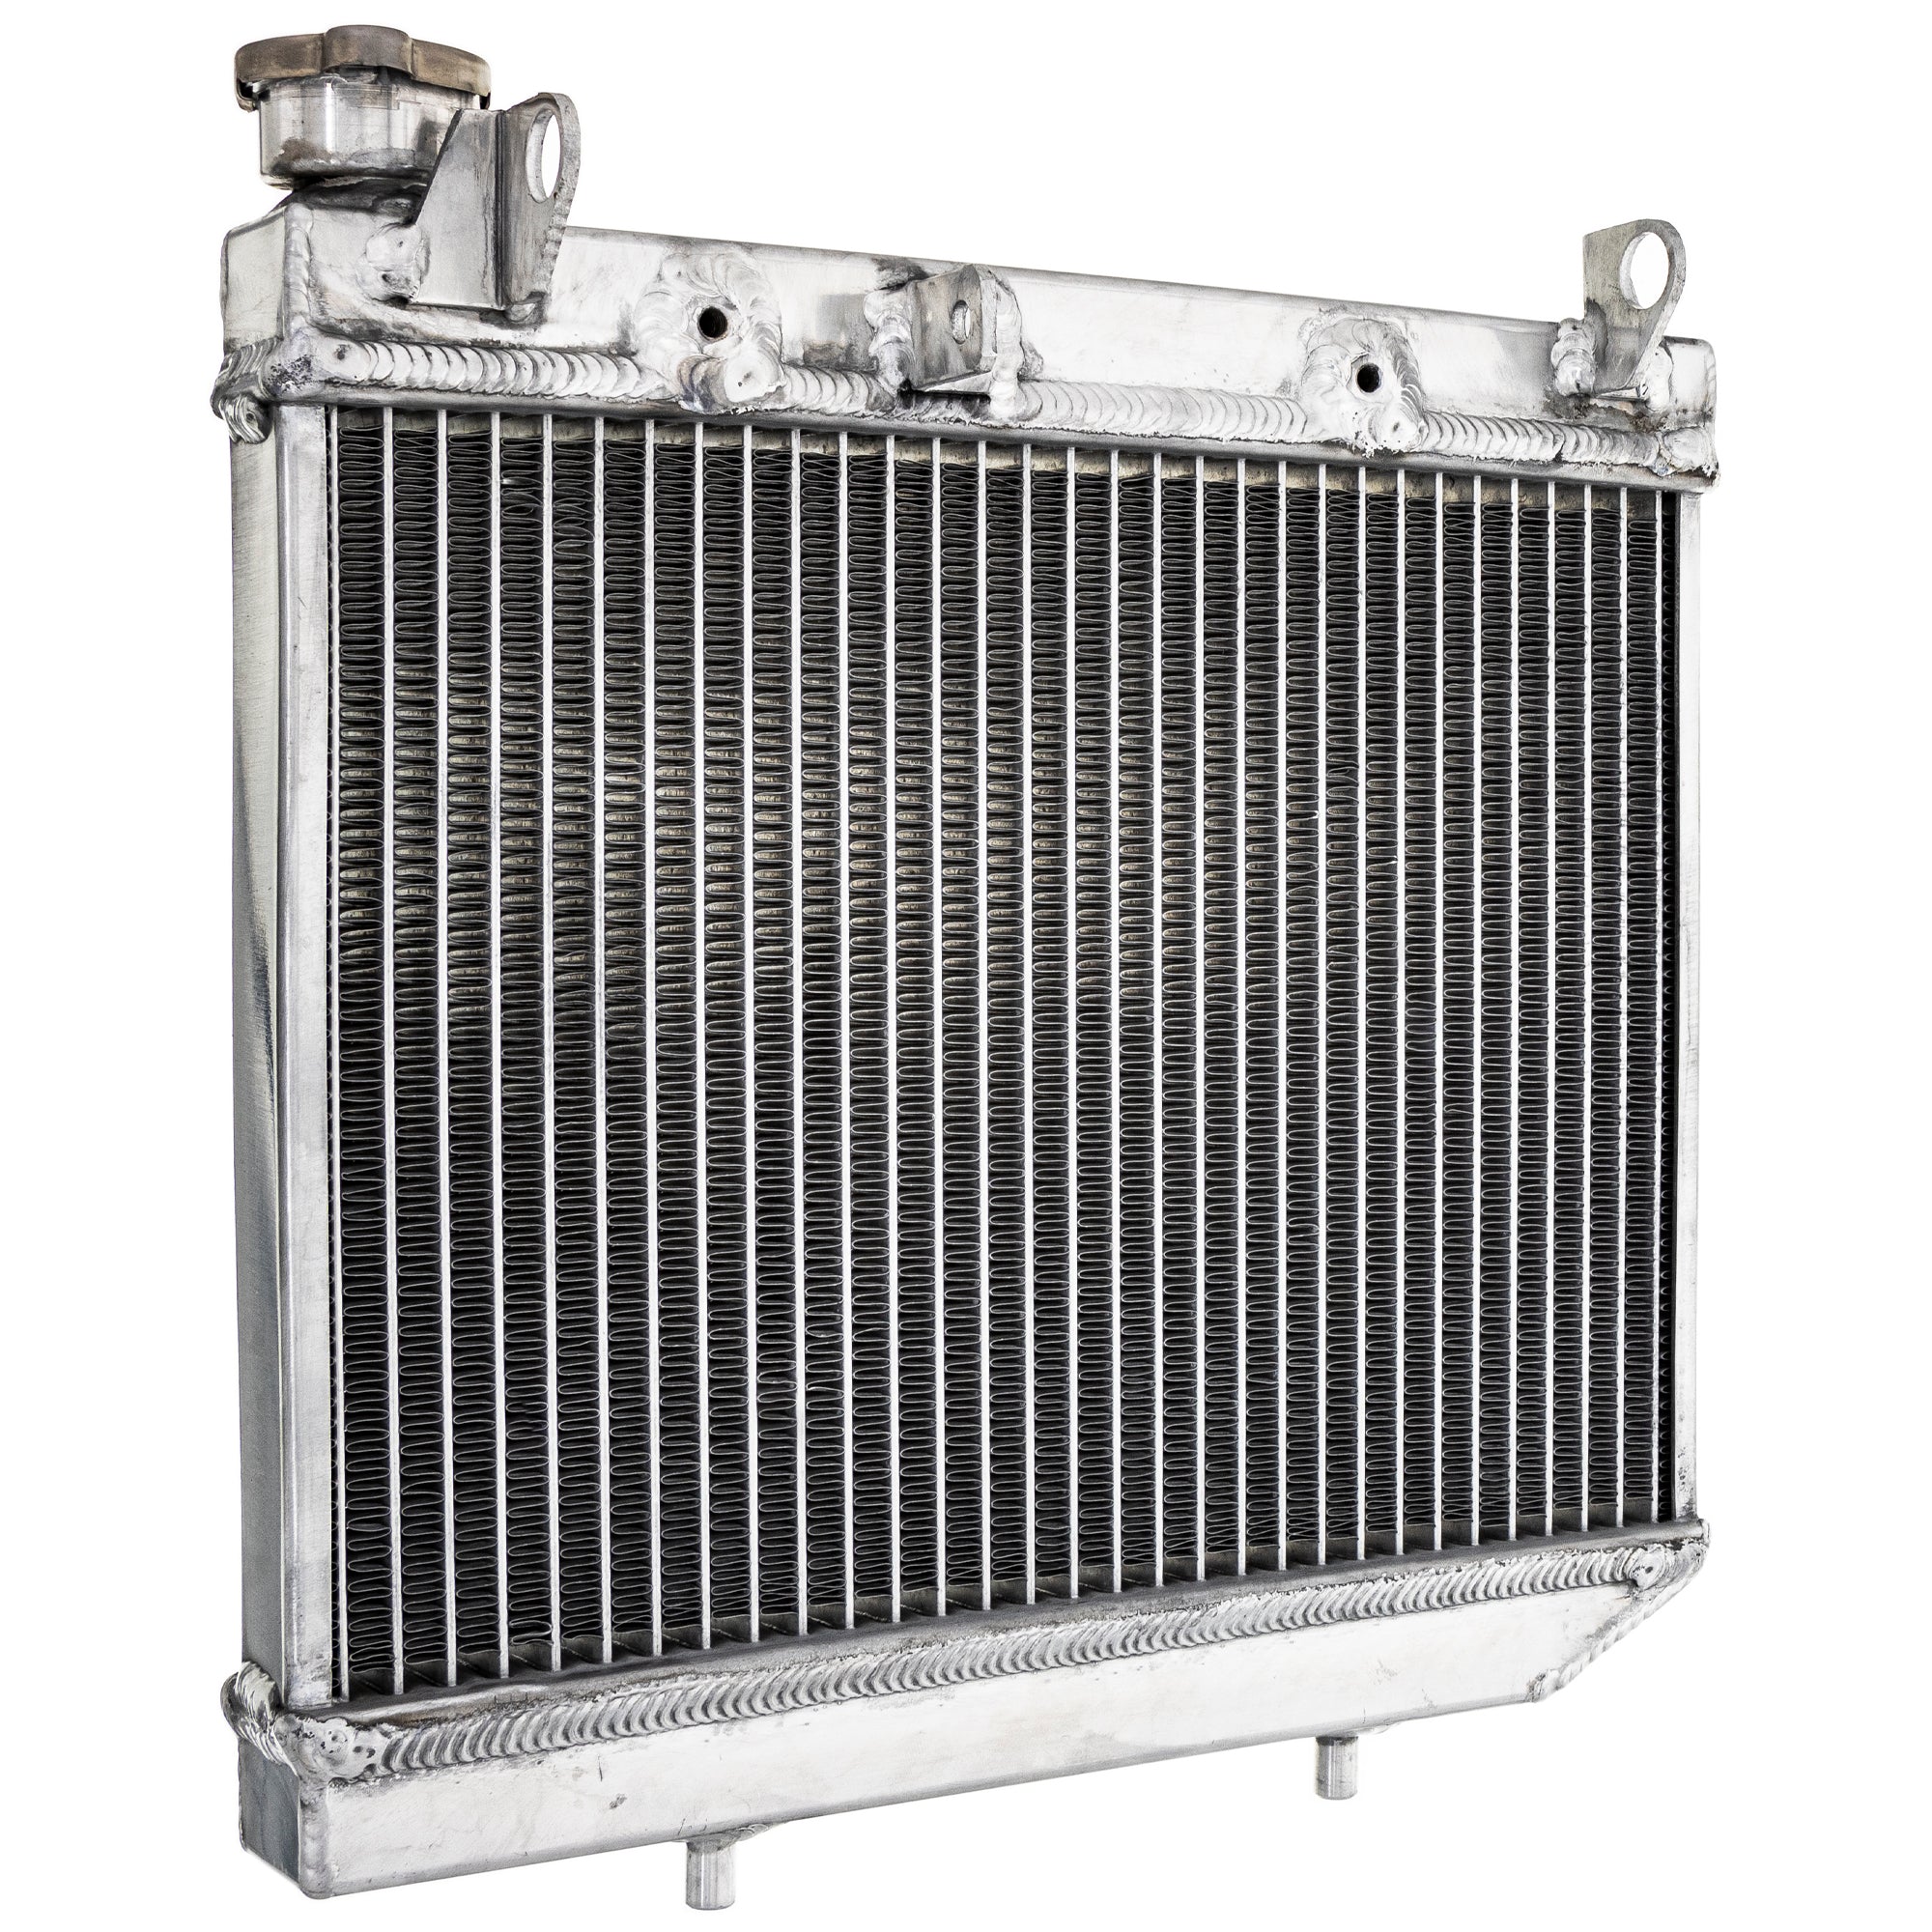 NICHE 519-CRD2230A High Capacity Radiator for zOTHER TRX450